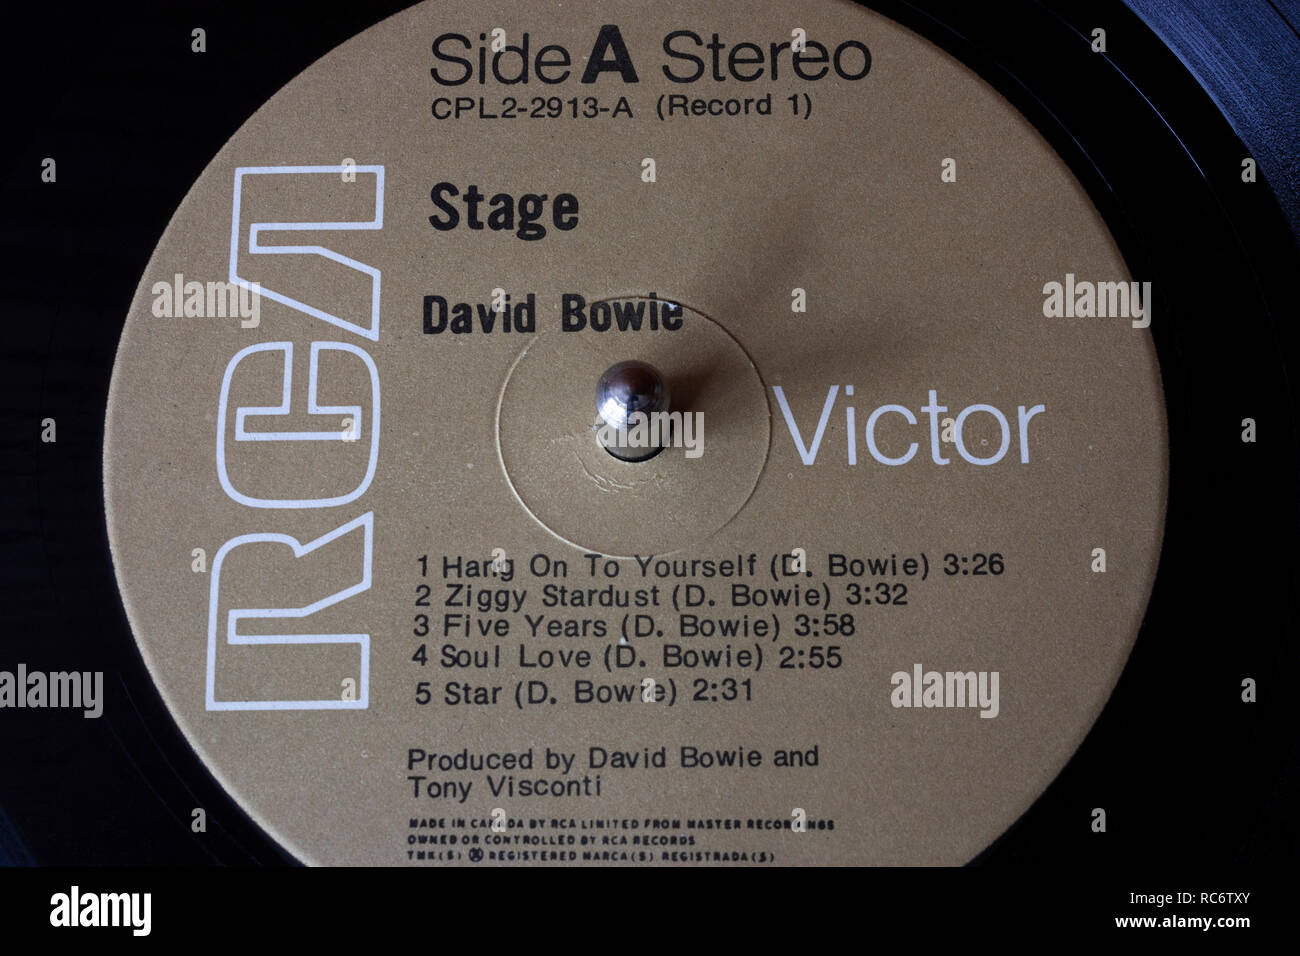 David Bowie: Ziggy Stardust And The Spiders From Mars – Victrola